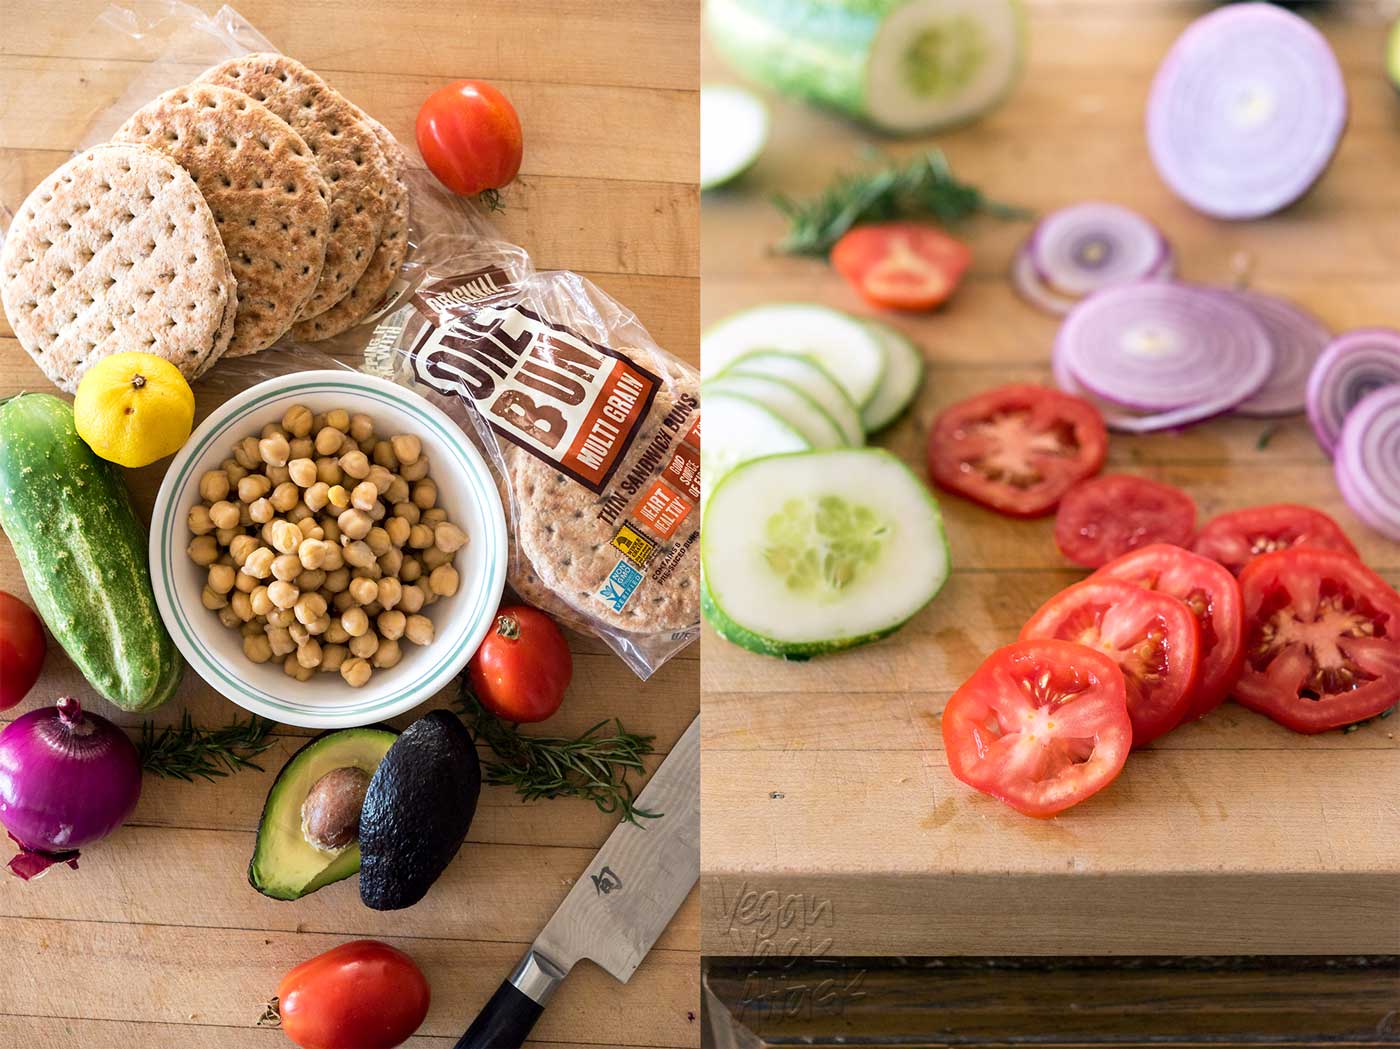 Rosemary Chickpea Salad Sandwich: Here’s a back-to-school-ready lunch idea that’s easy and delicious! #vegan #soyfree #nutfree